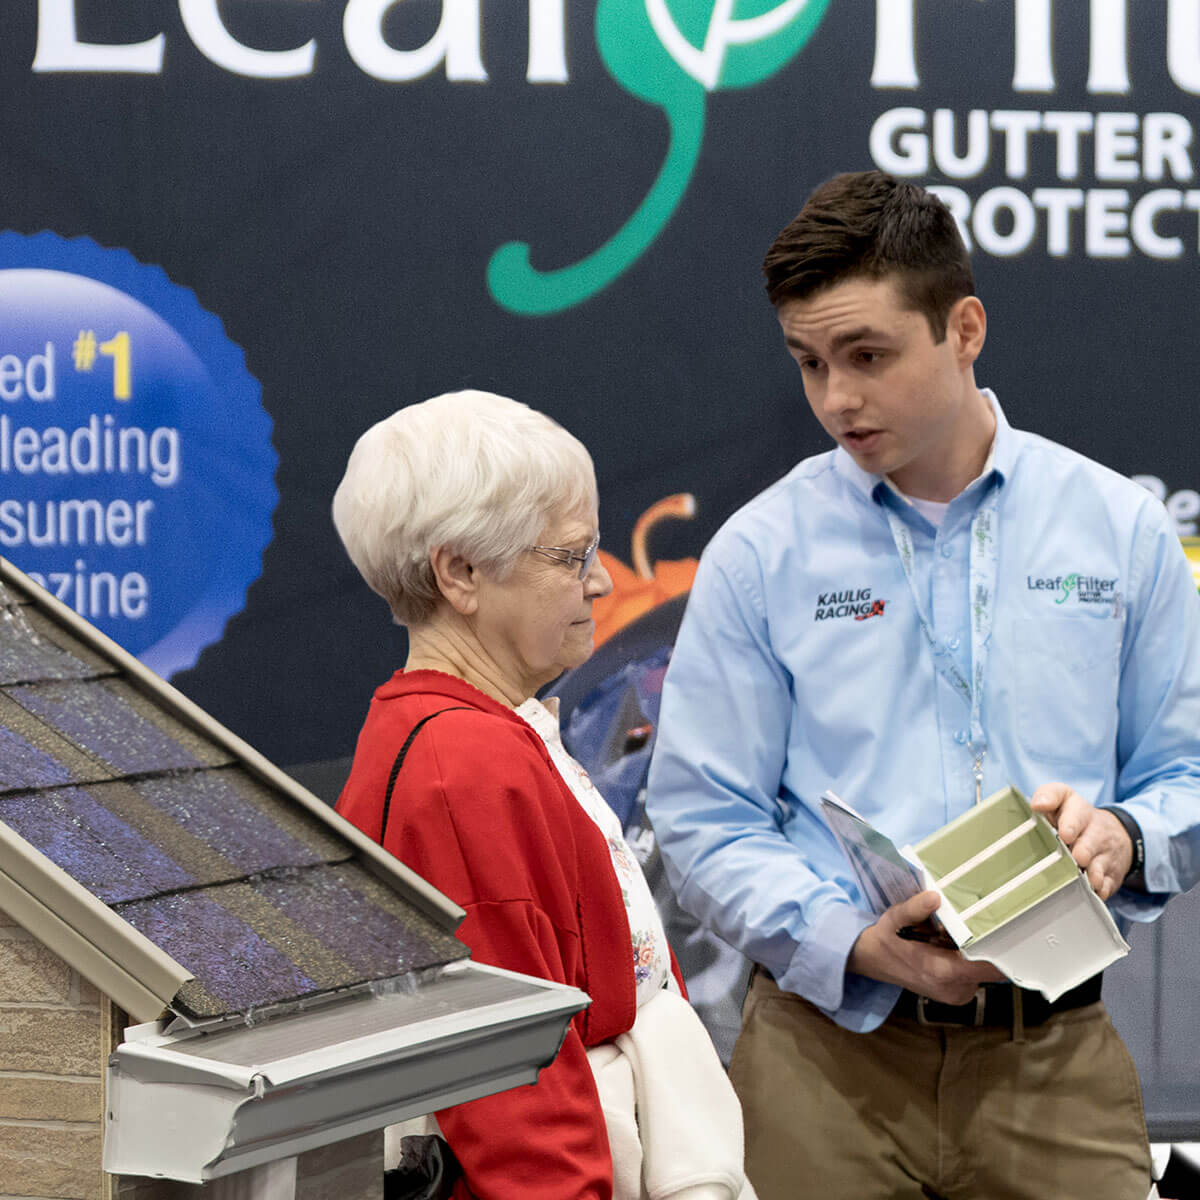 LeafFilter employee discussing product information during a hands-on event